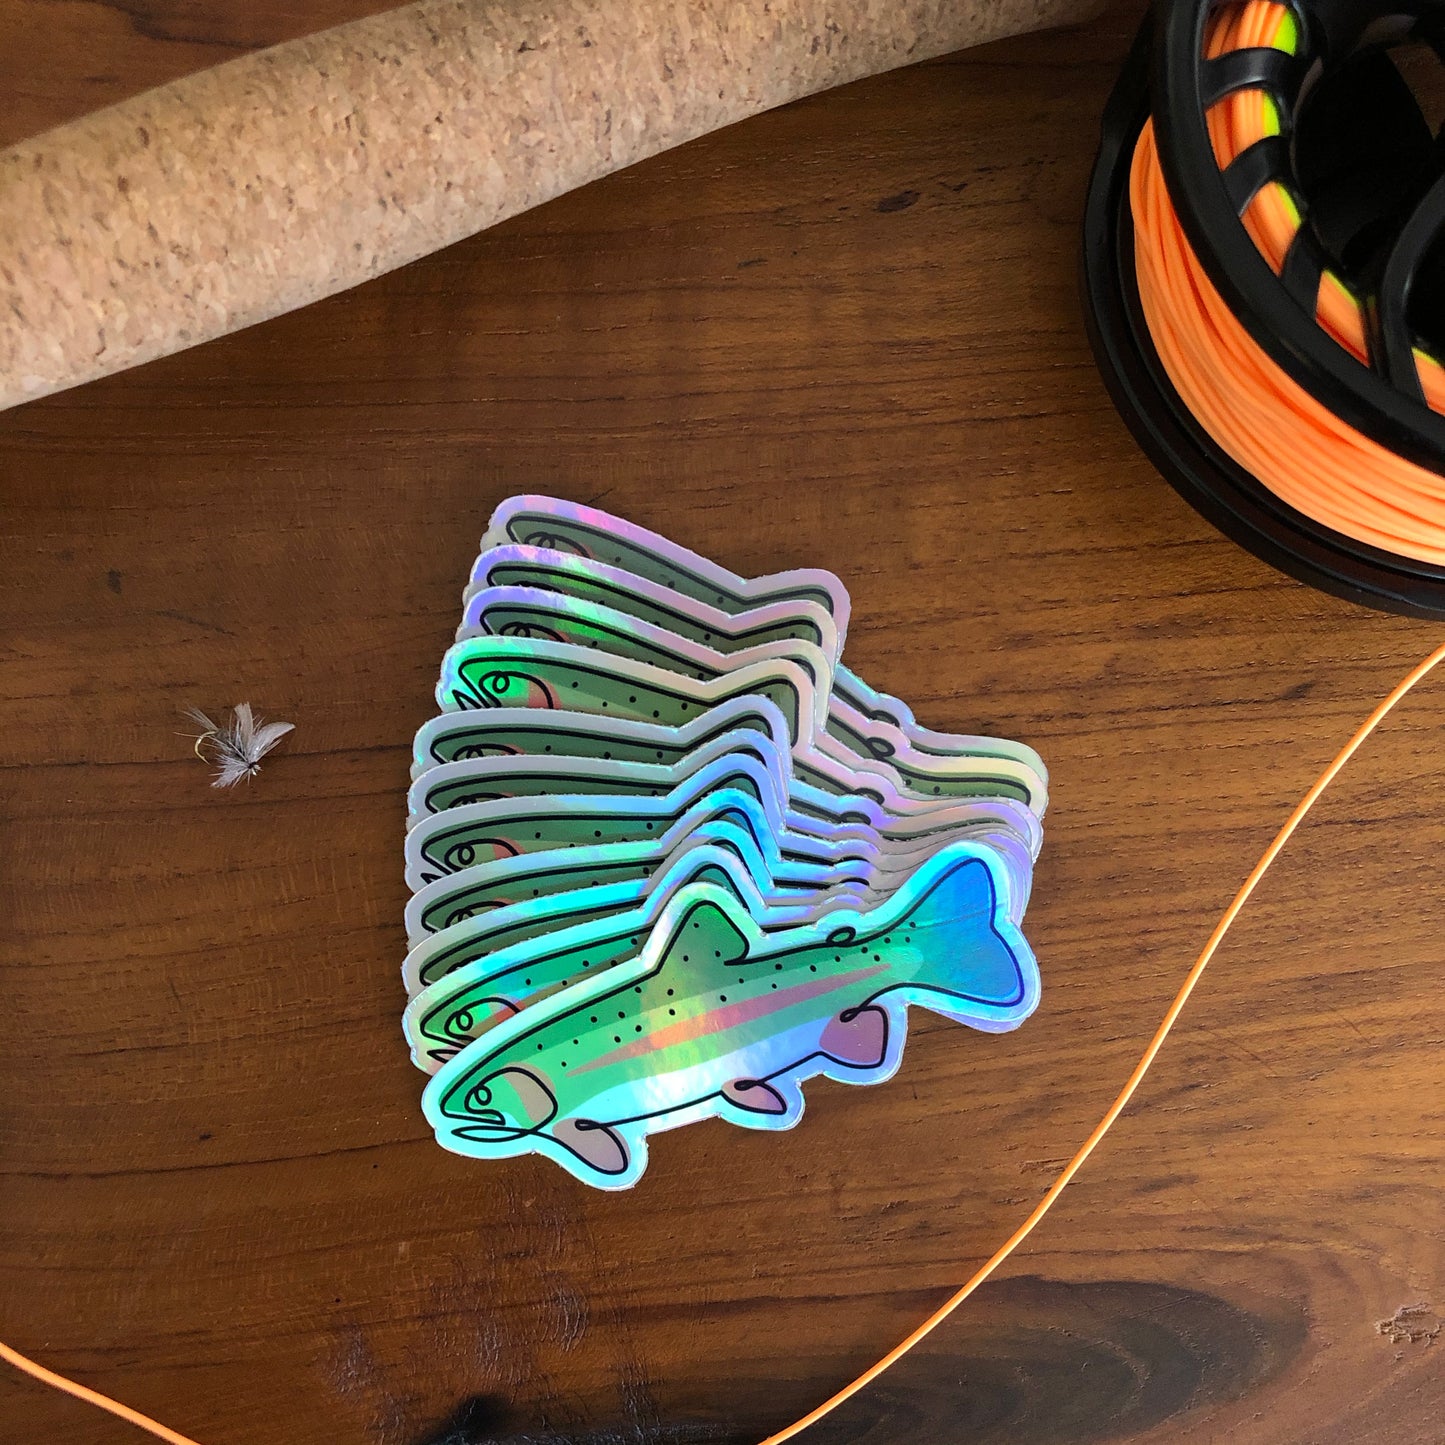 Thunderbird Outdoor SupplyRainbow Trout - Single Line Holographic DecalRainbow Trout - Single Line Holographic Decal
Single Line Contour Illustration of a Rainbow Trout. Weatherproof holographic stickers perfect for your laptop, water bottle, car or whatever else you can stick it 